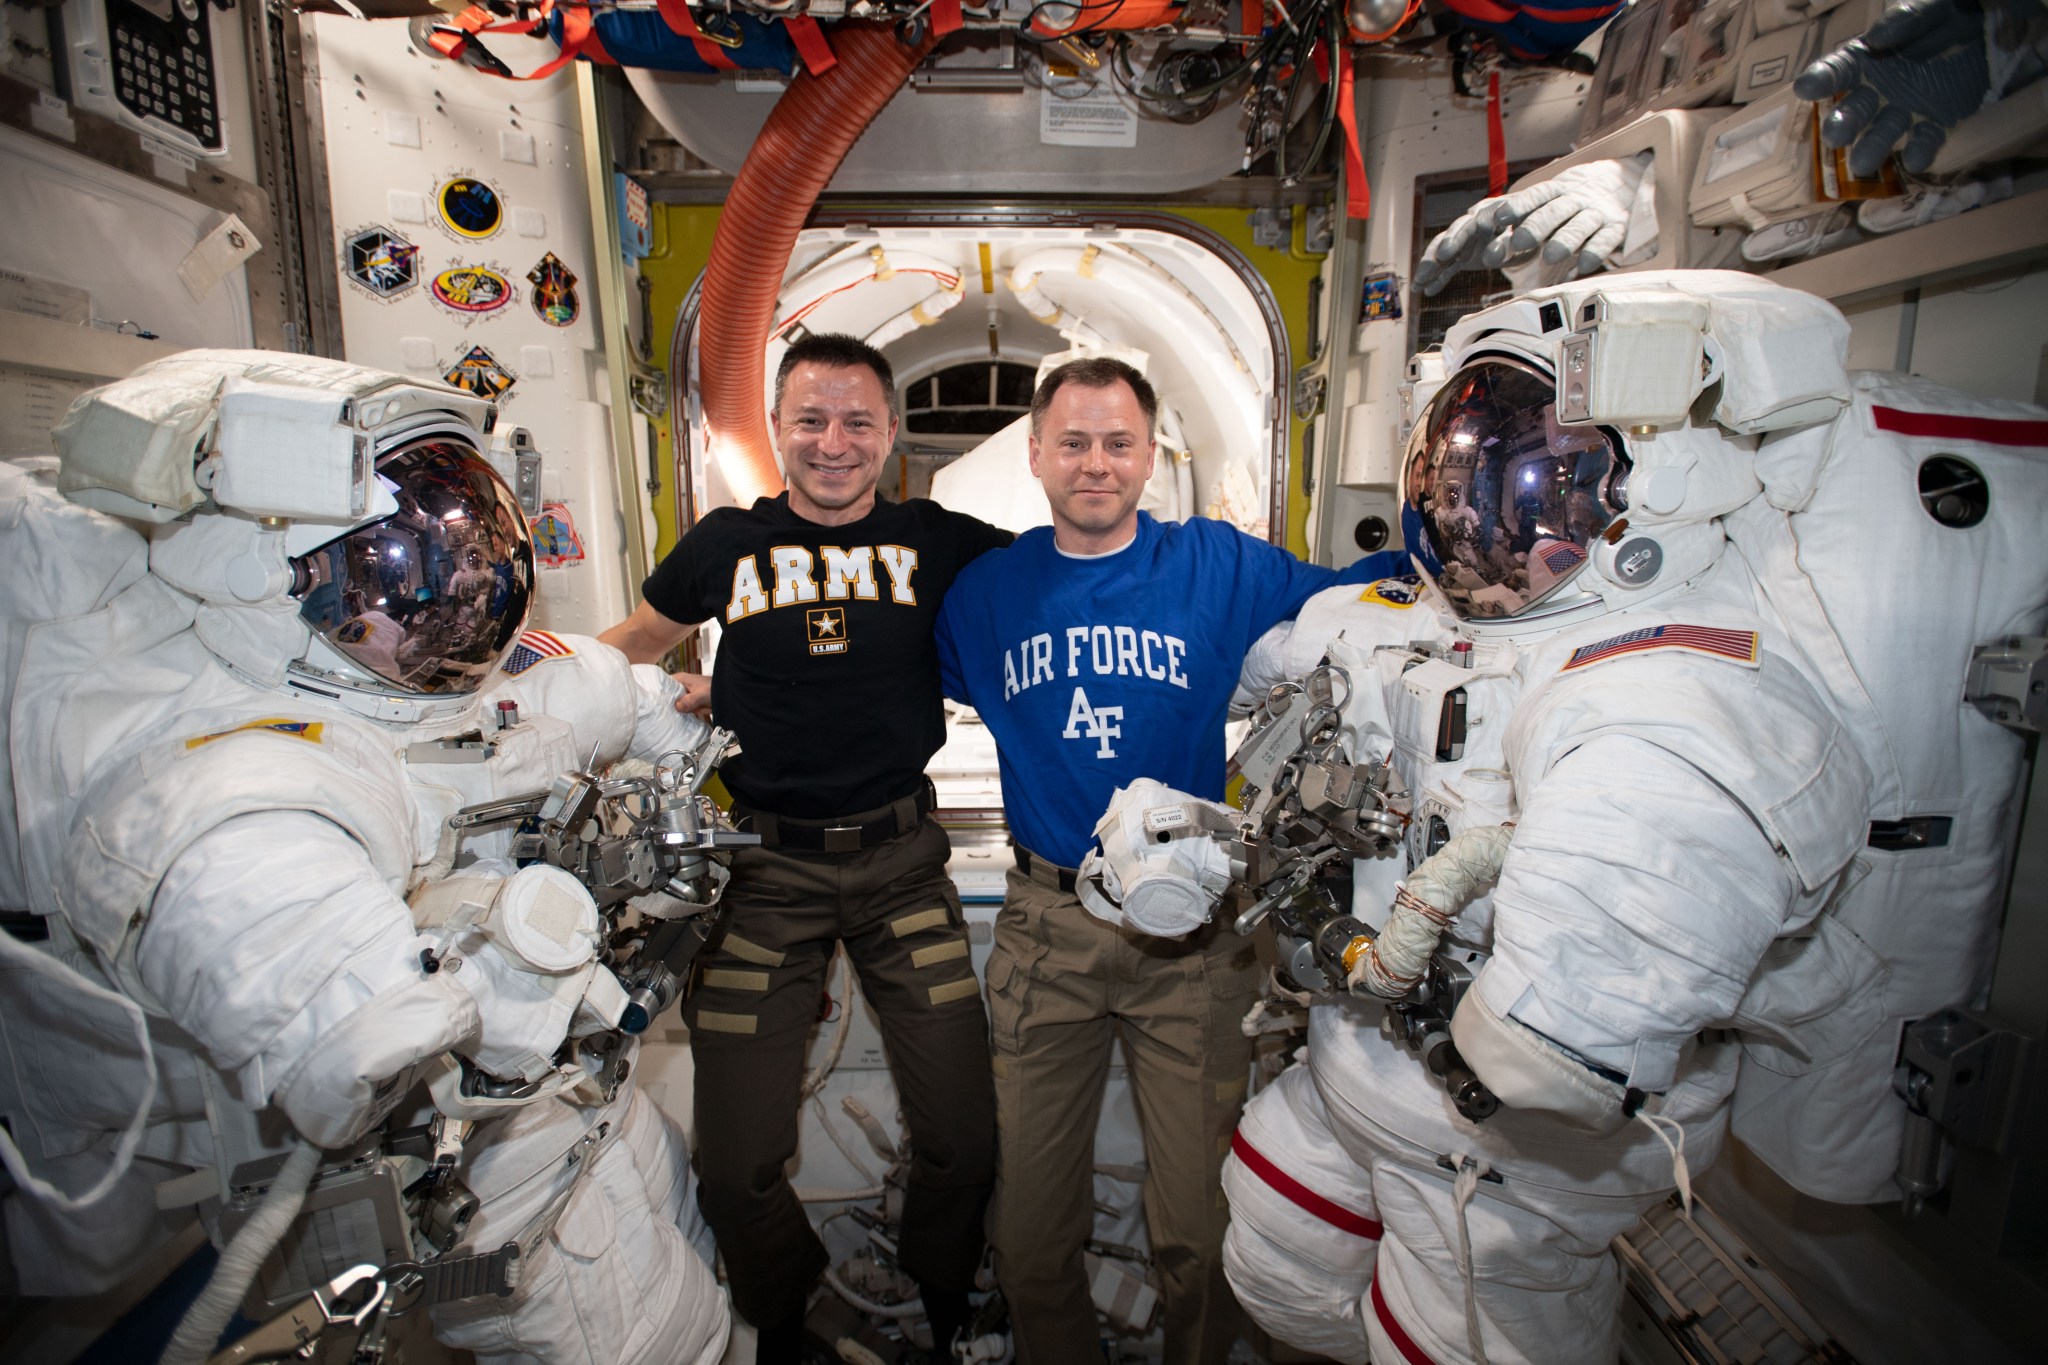 Expedition 60 crew members Drew Morgan and Nick Hague